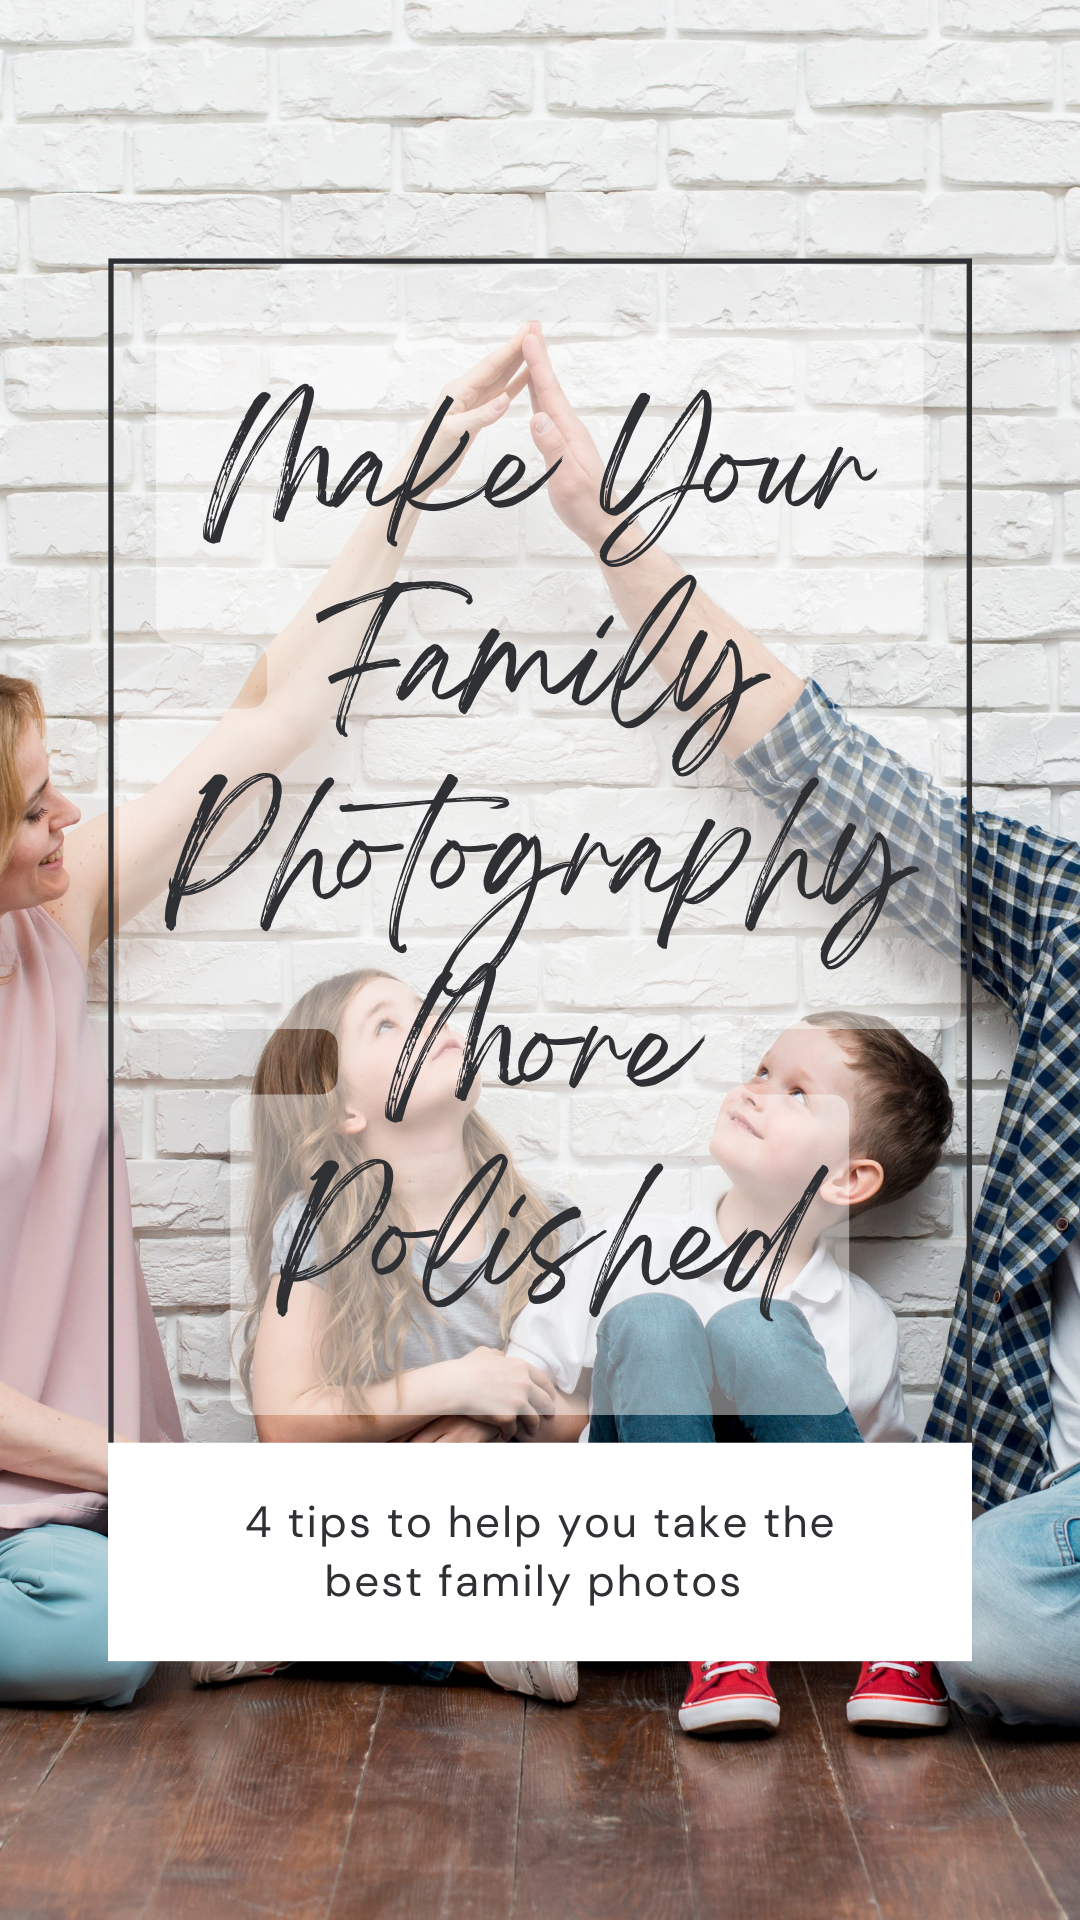 4 Tips to Make Your Family Photography More Polished